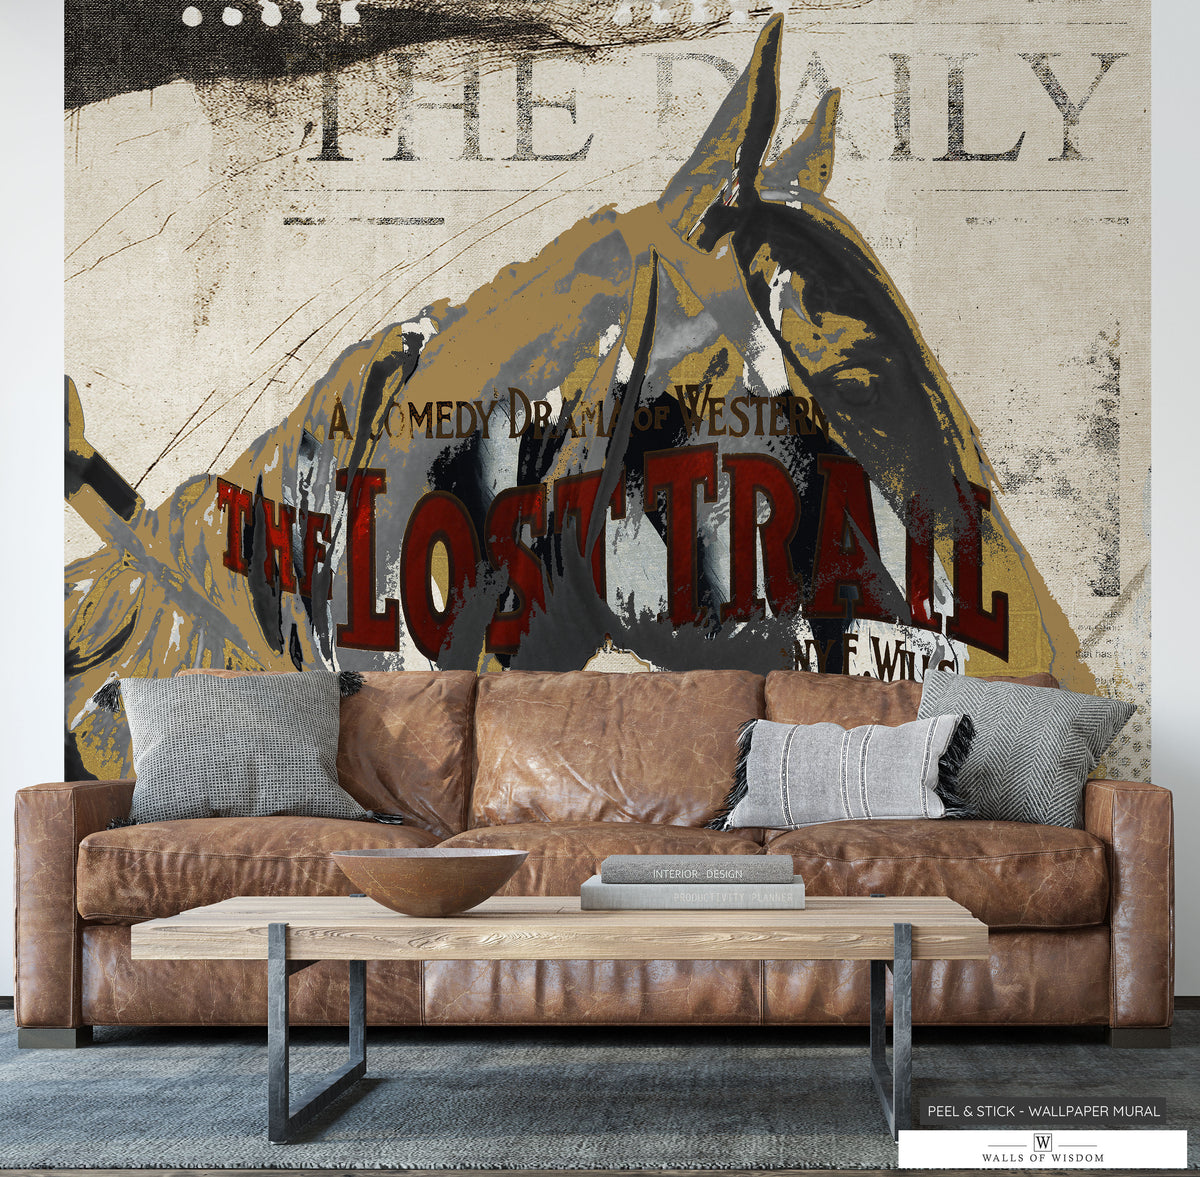 Contemporary 'Lost Trail' Cowboy and Horse Wallpaper Mural in Earthy Tones.